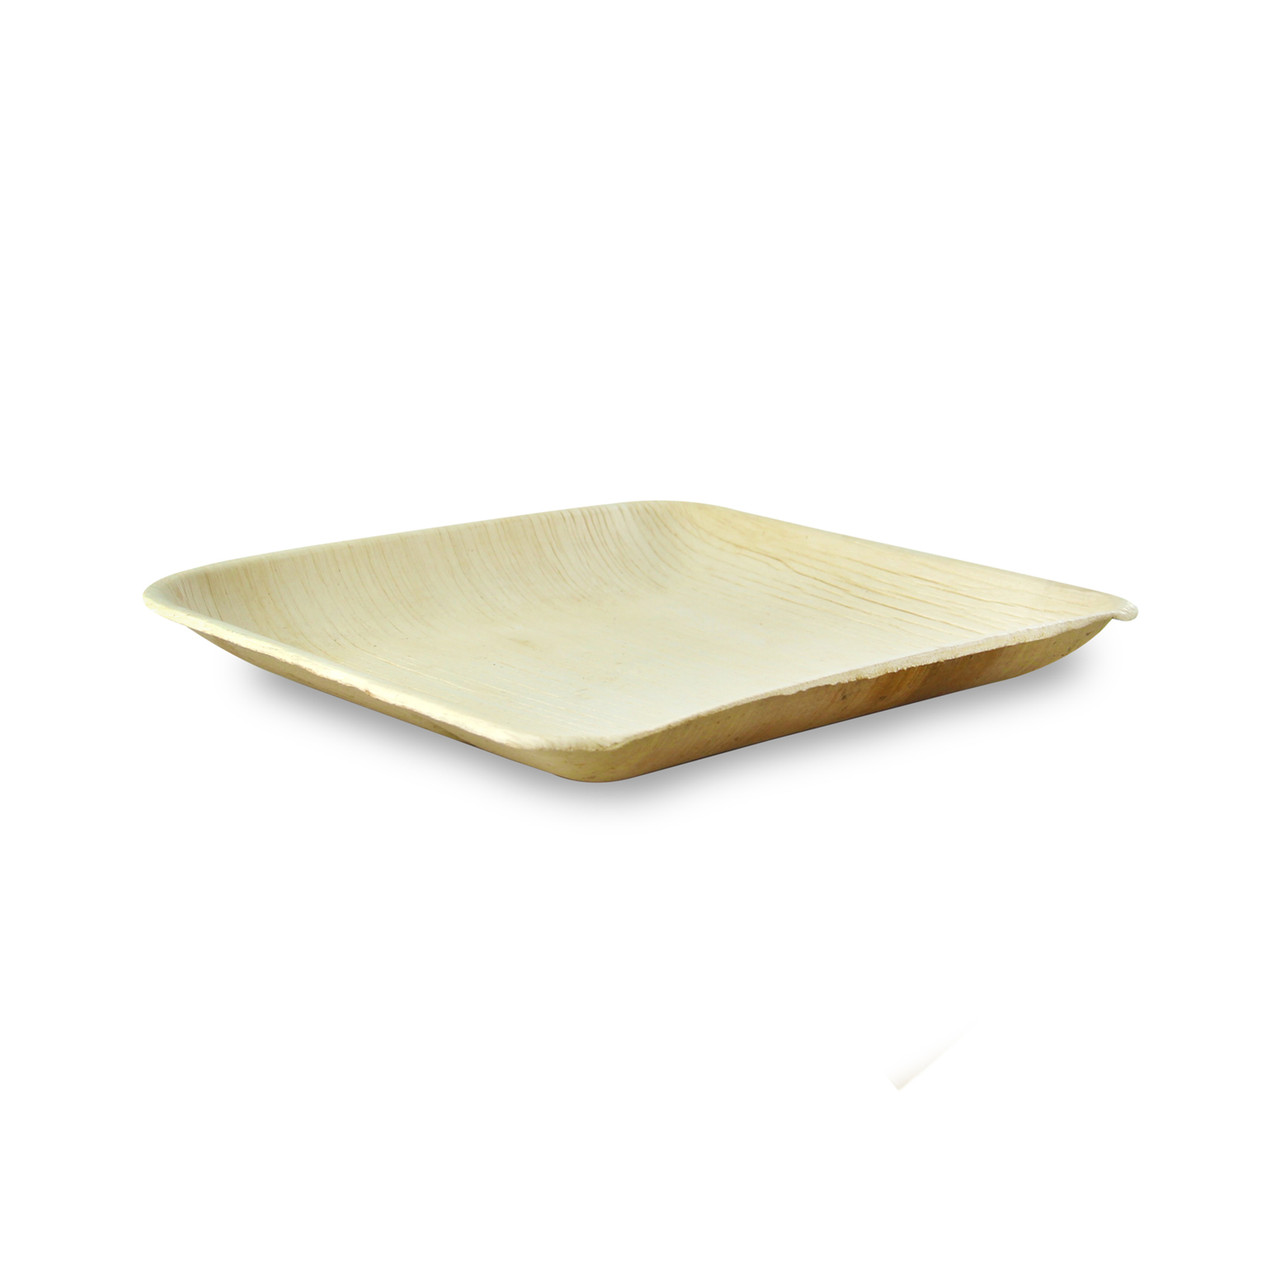 Square Palm Leaf Plate With Rounded Corners - L:7.95 x W:7.95 x H:.5in